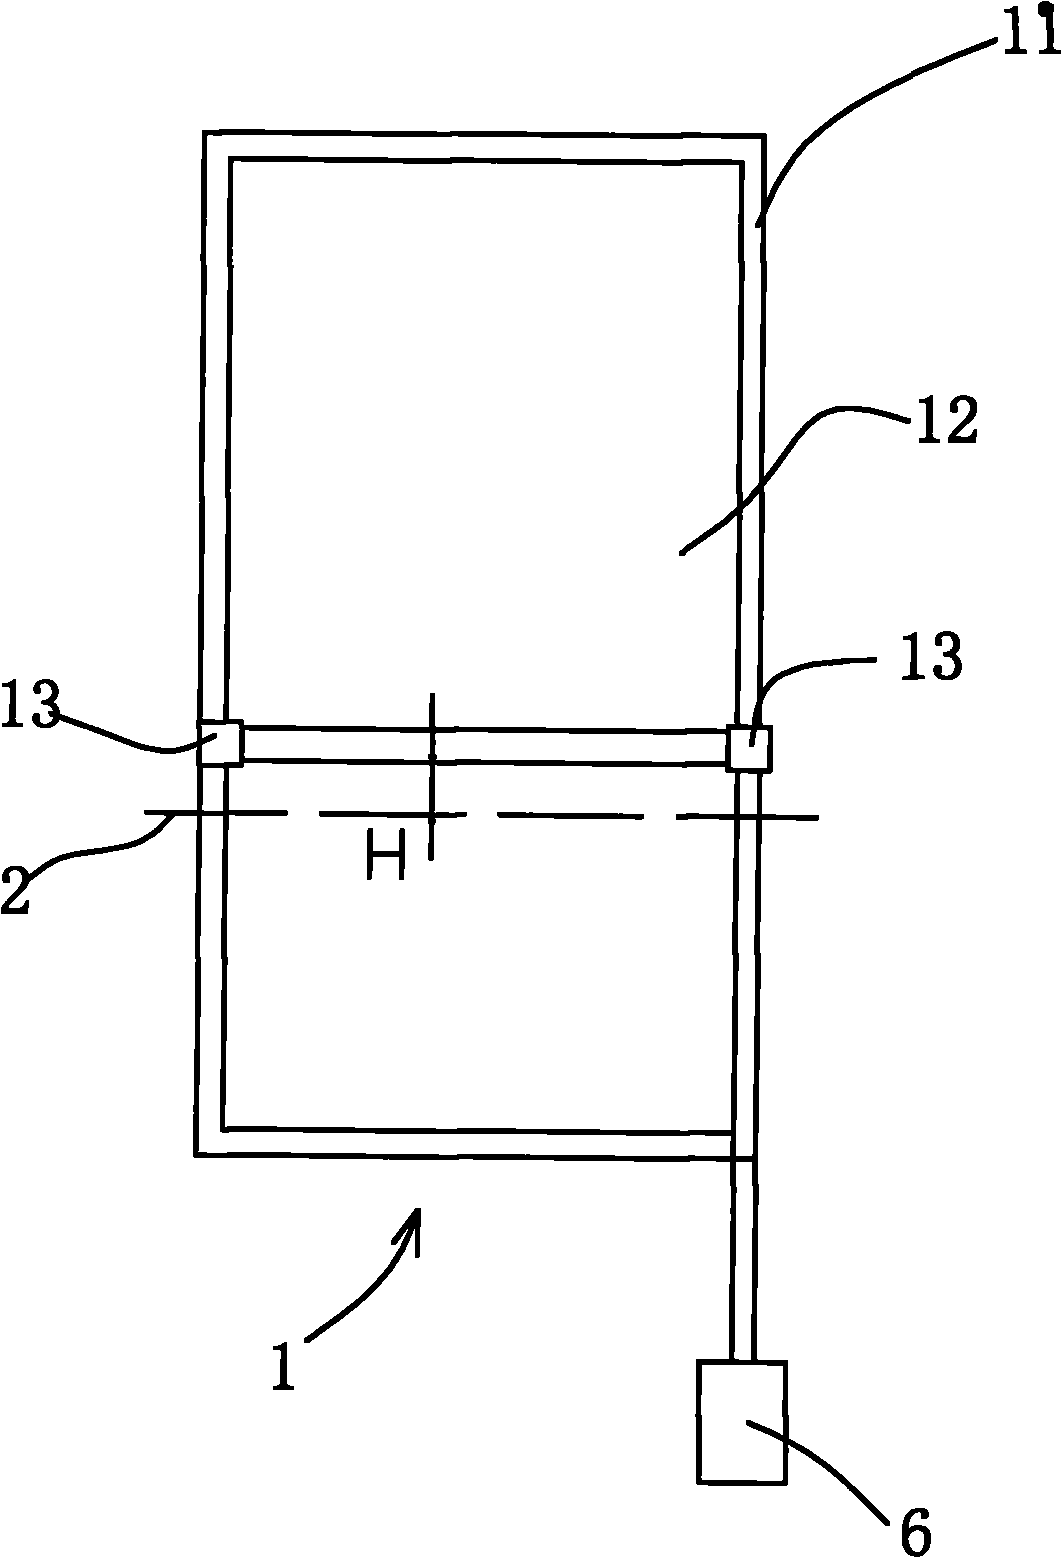 Blade system of vertical axis wind turbine